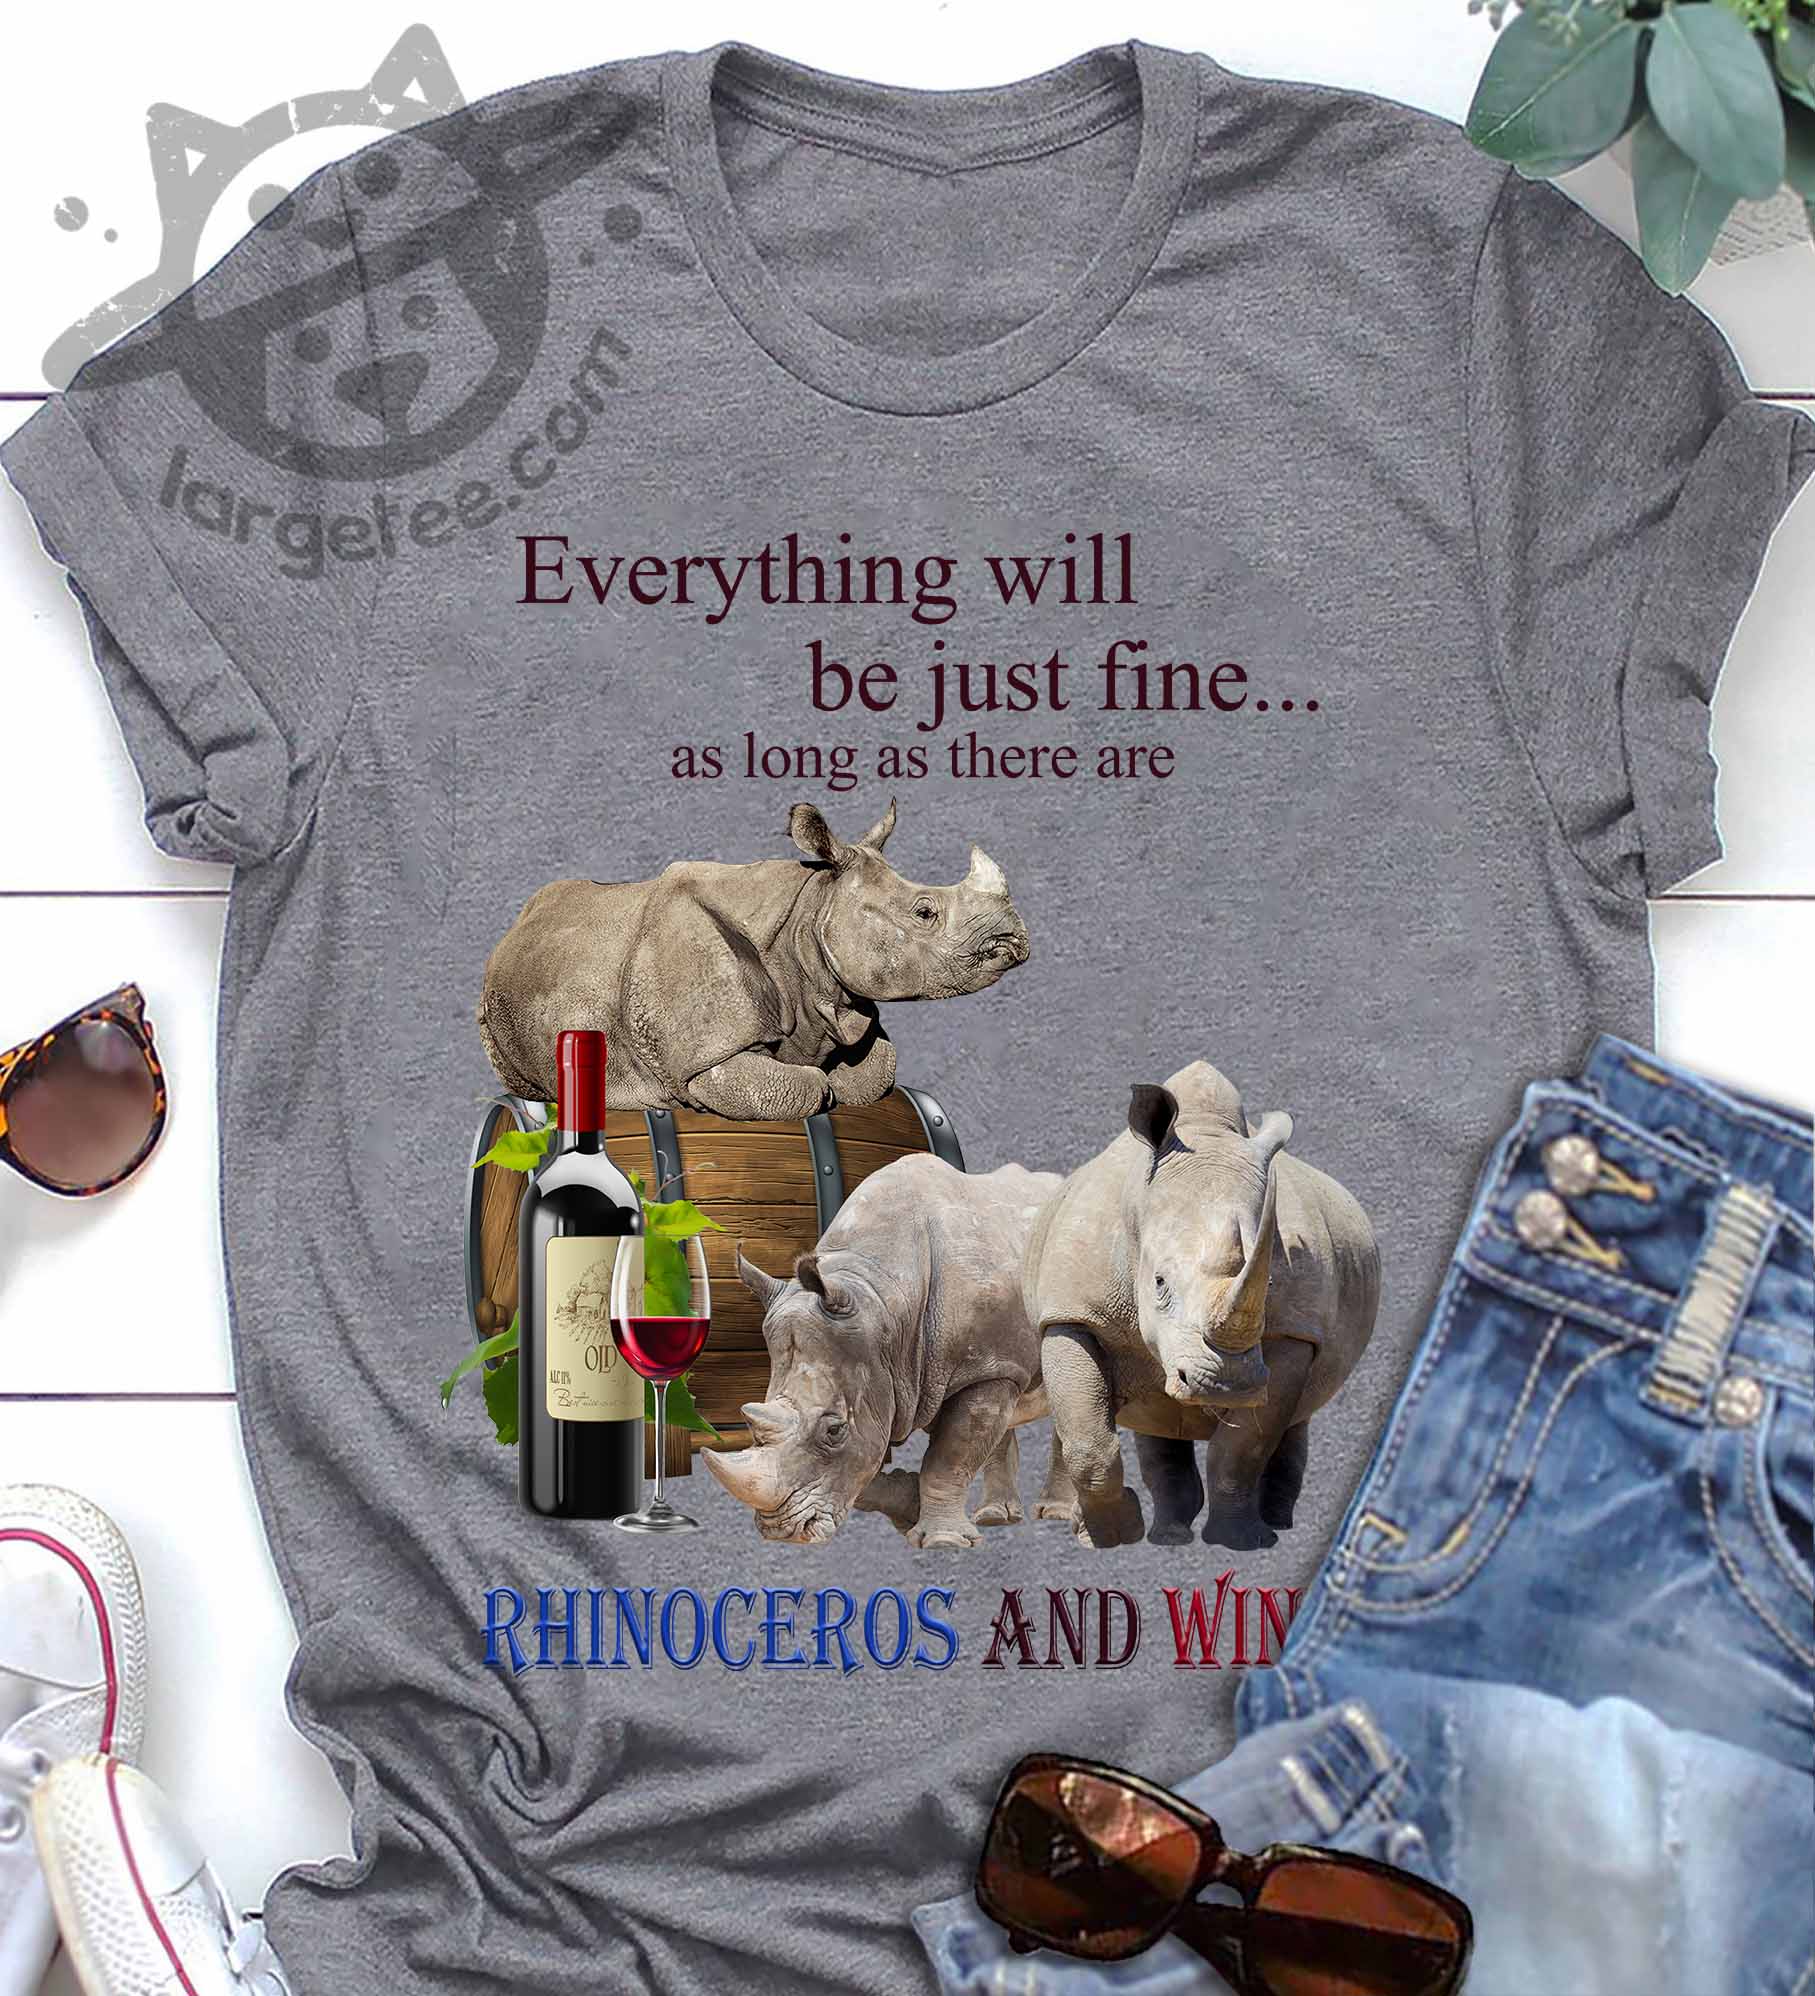 Rhinoceros And Wine - Everything will be just fine as long as there are rhinocero and wine